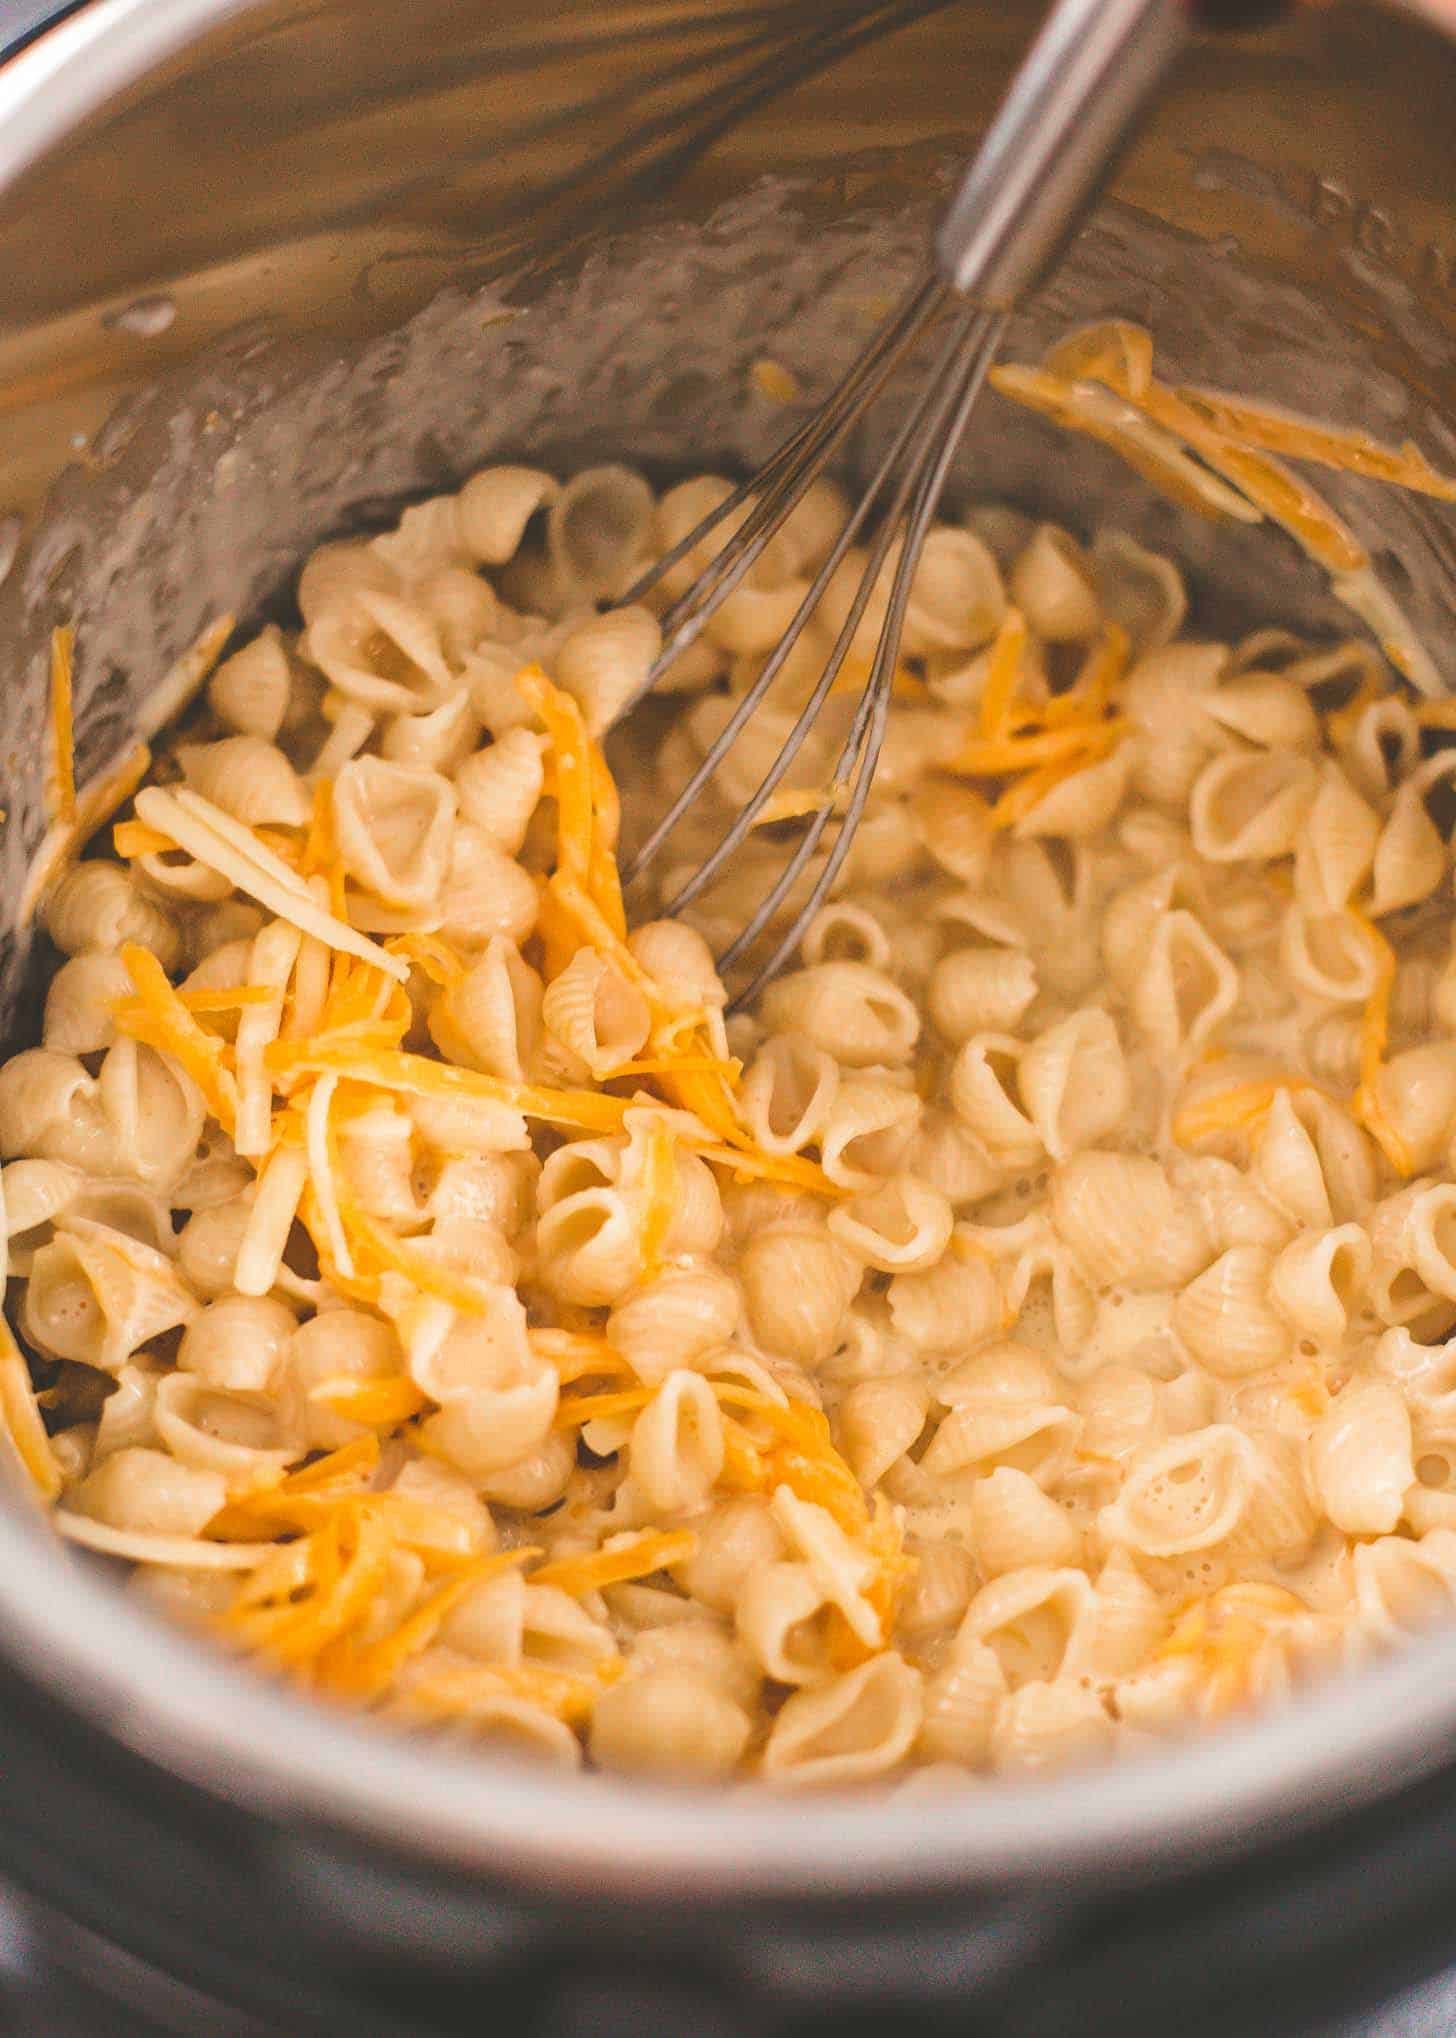 stirring cheese into pasta in the bowl of a pressure cooker